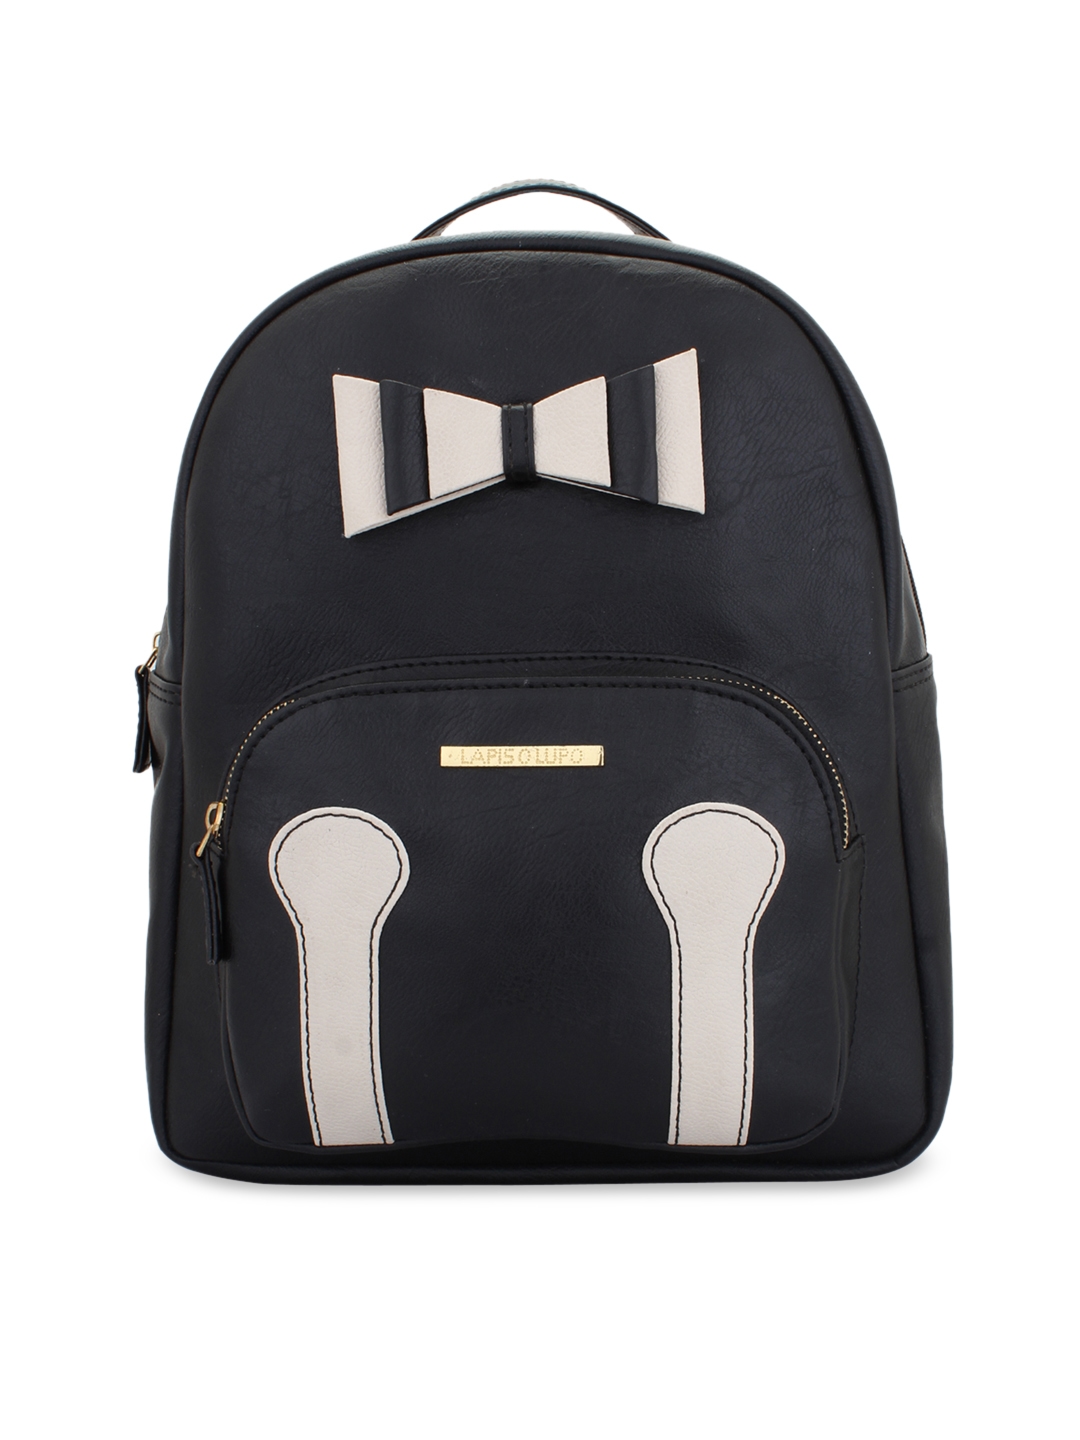 Lapis O Lupo Women Black Solid Backpack